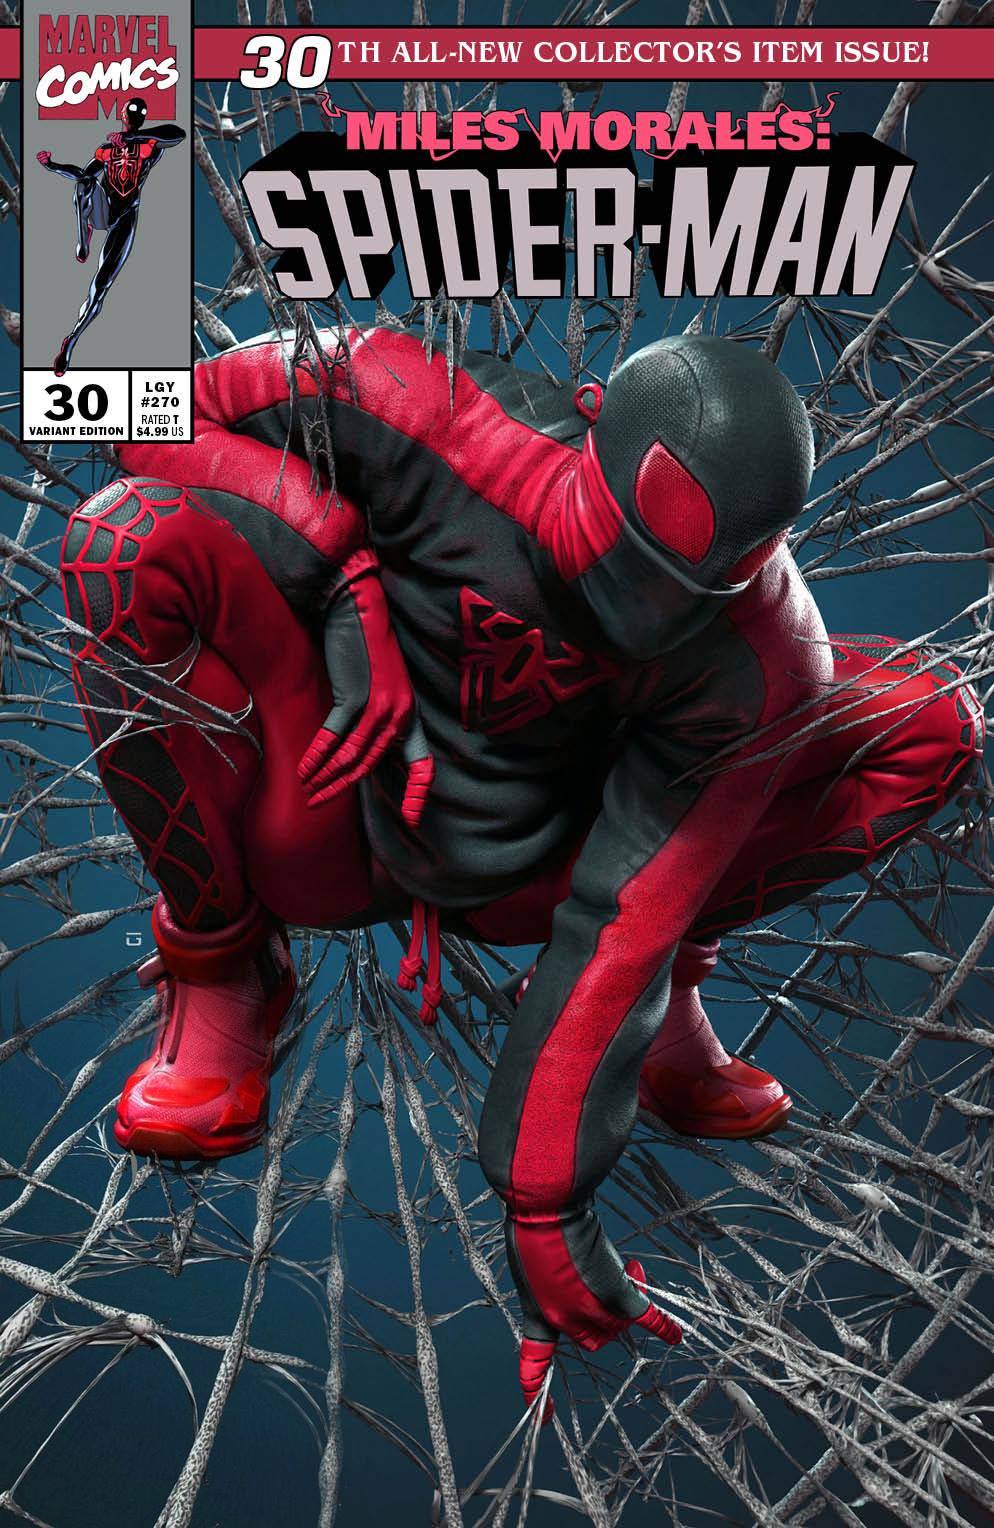 MILES MORALES SPIDER-MAN #30 RAFAEL GRASSETTI TRADE DRESS VARIANT LIMITED TO 3000